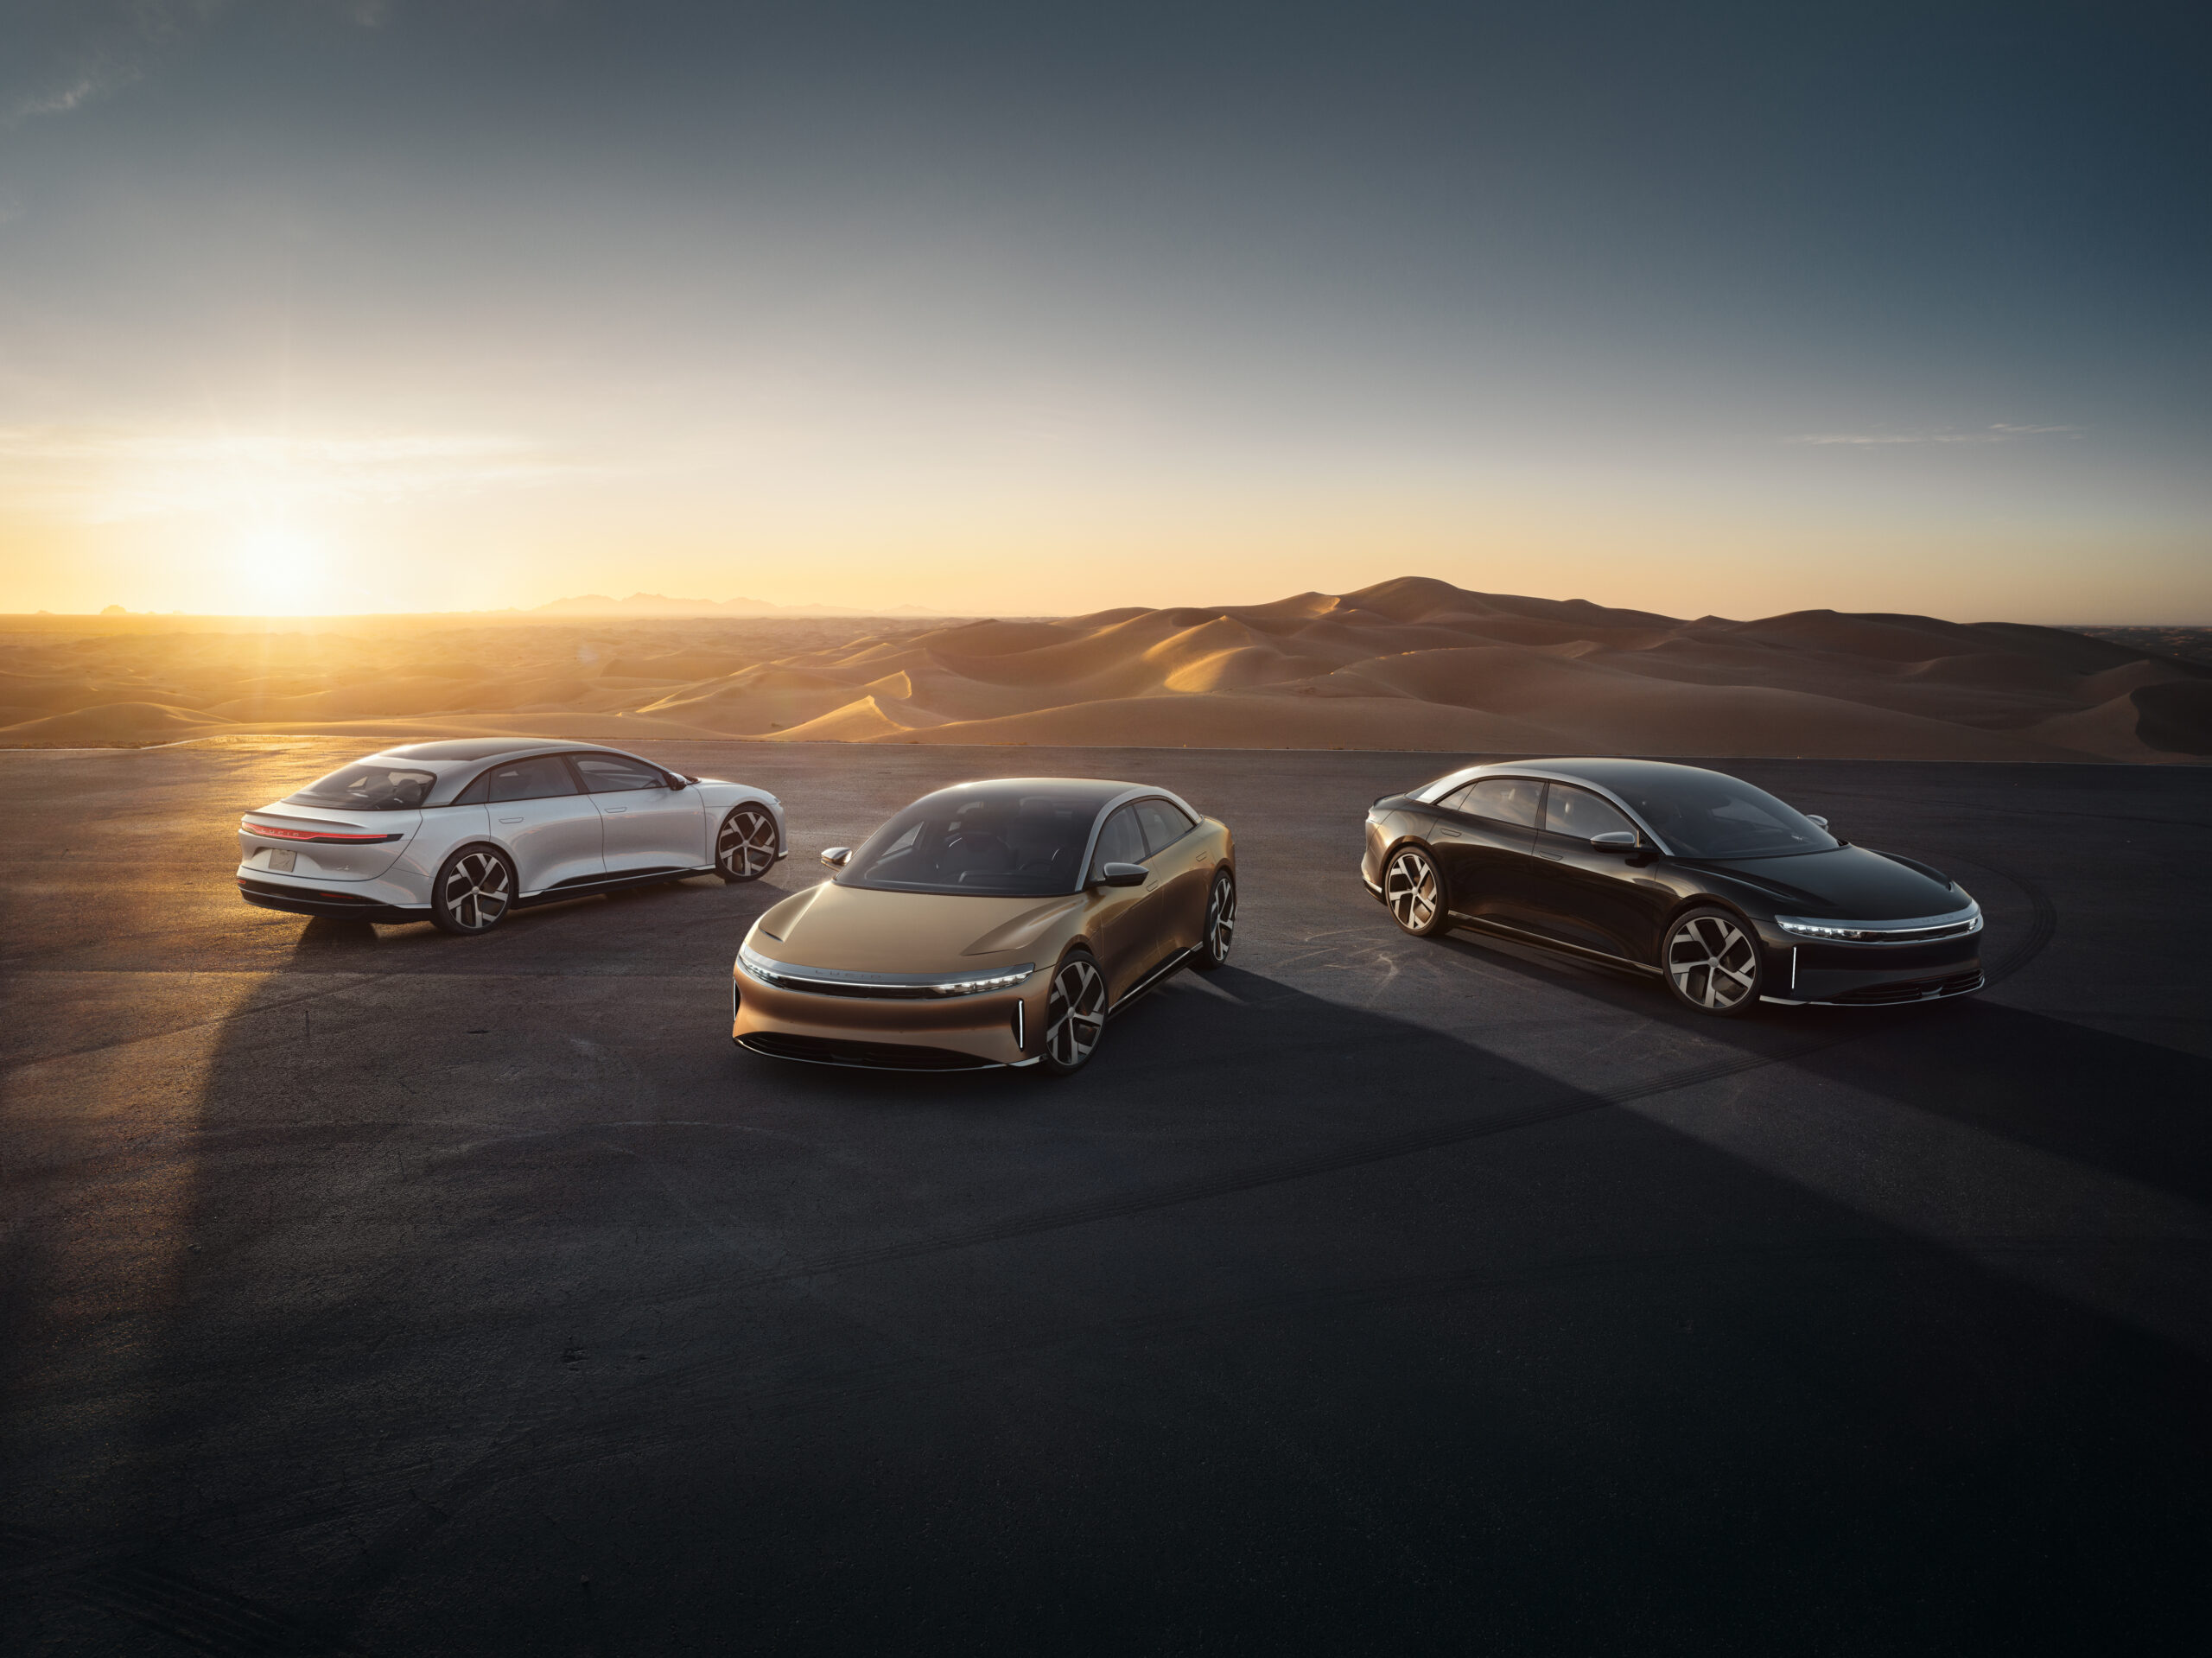 Lucid Motors Soliciting Reservation Holders To Upgrade To More Expensive Model For Original Price